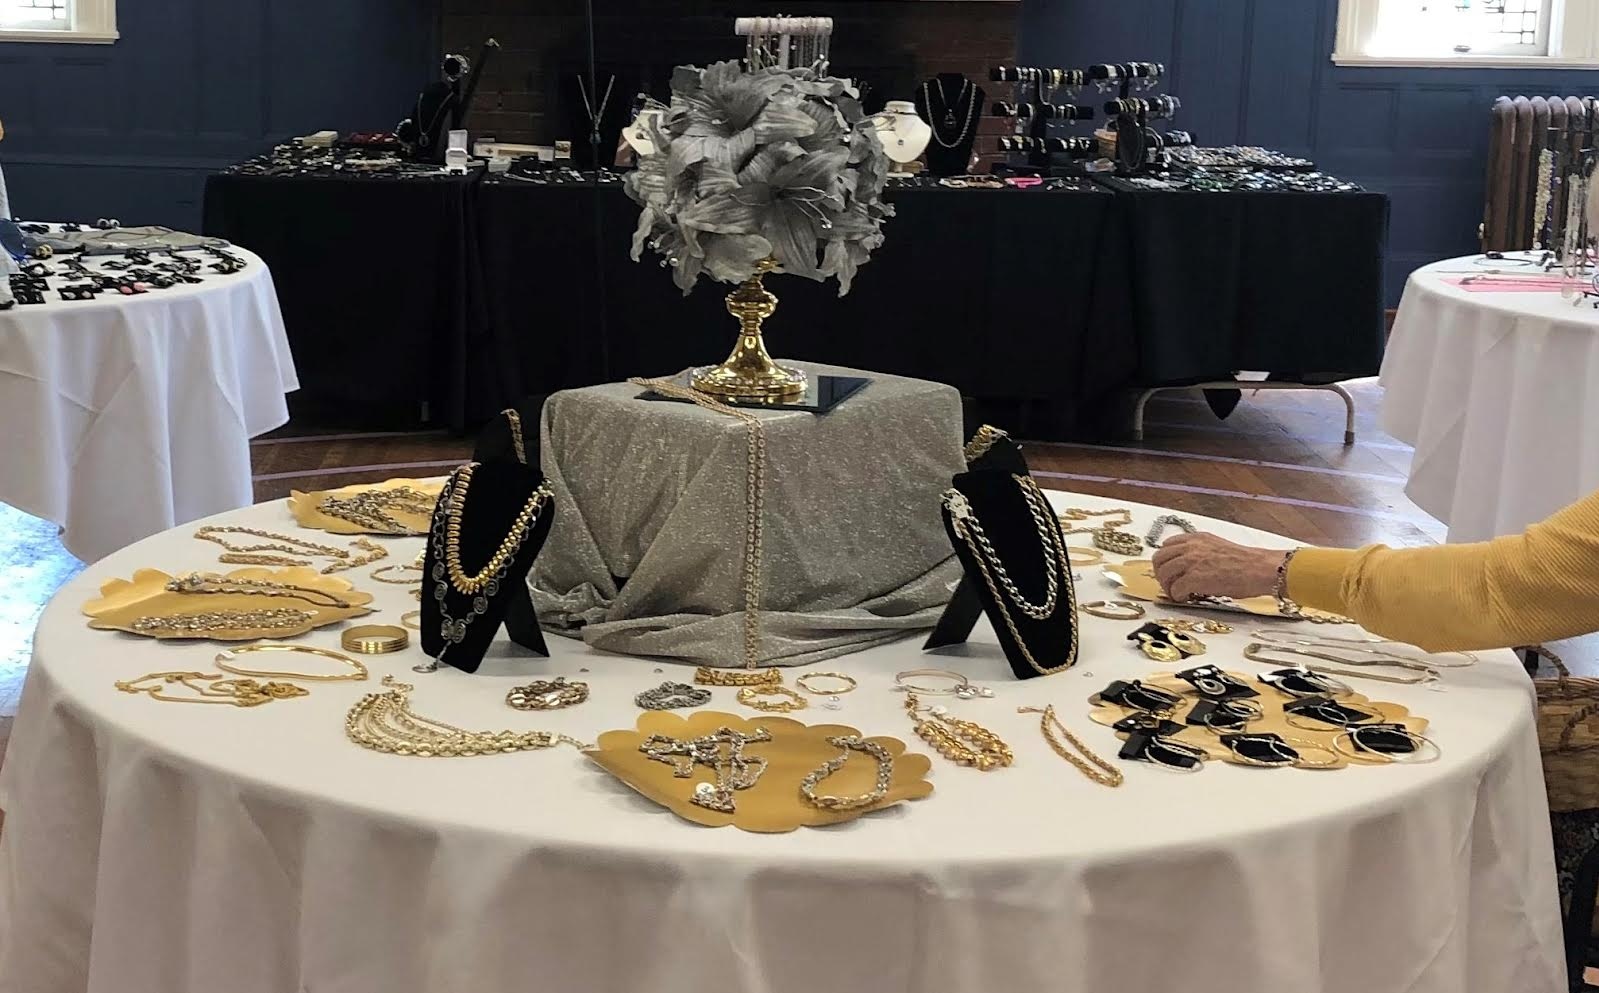 Jewelry on table